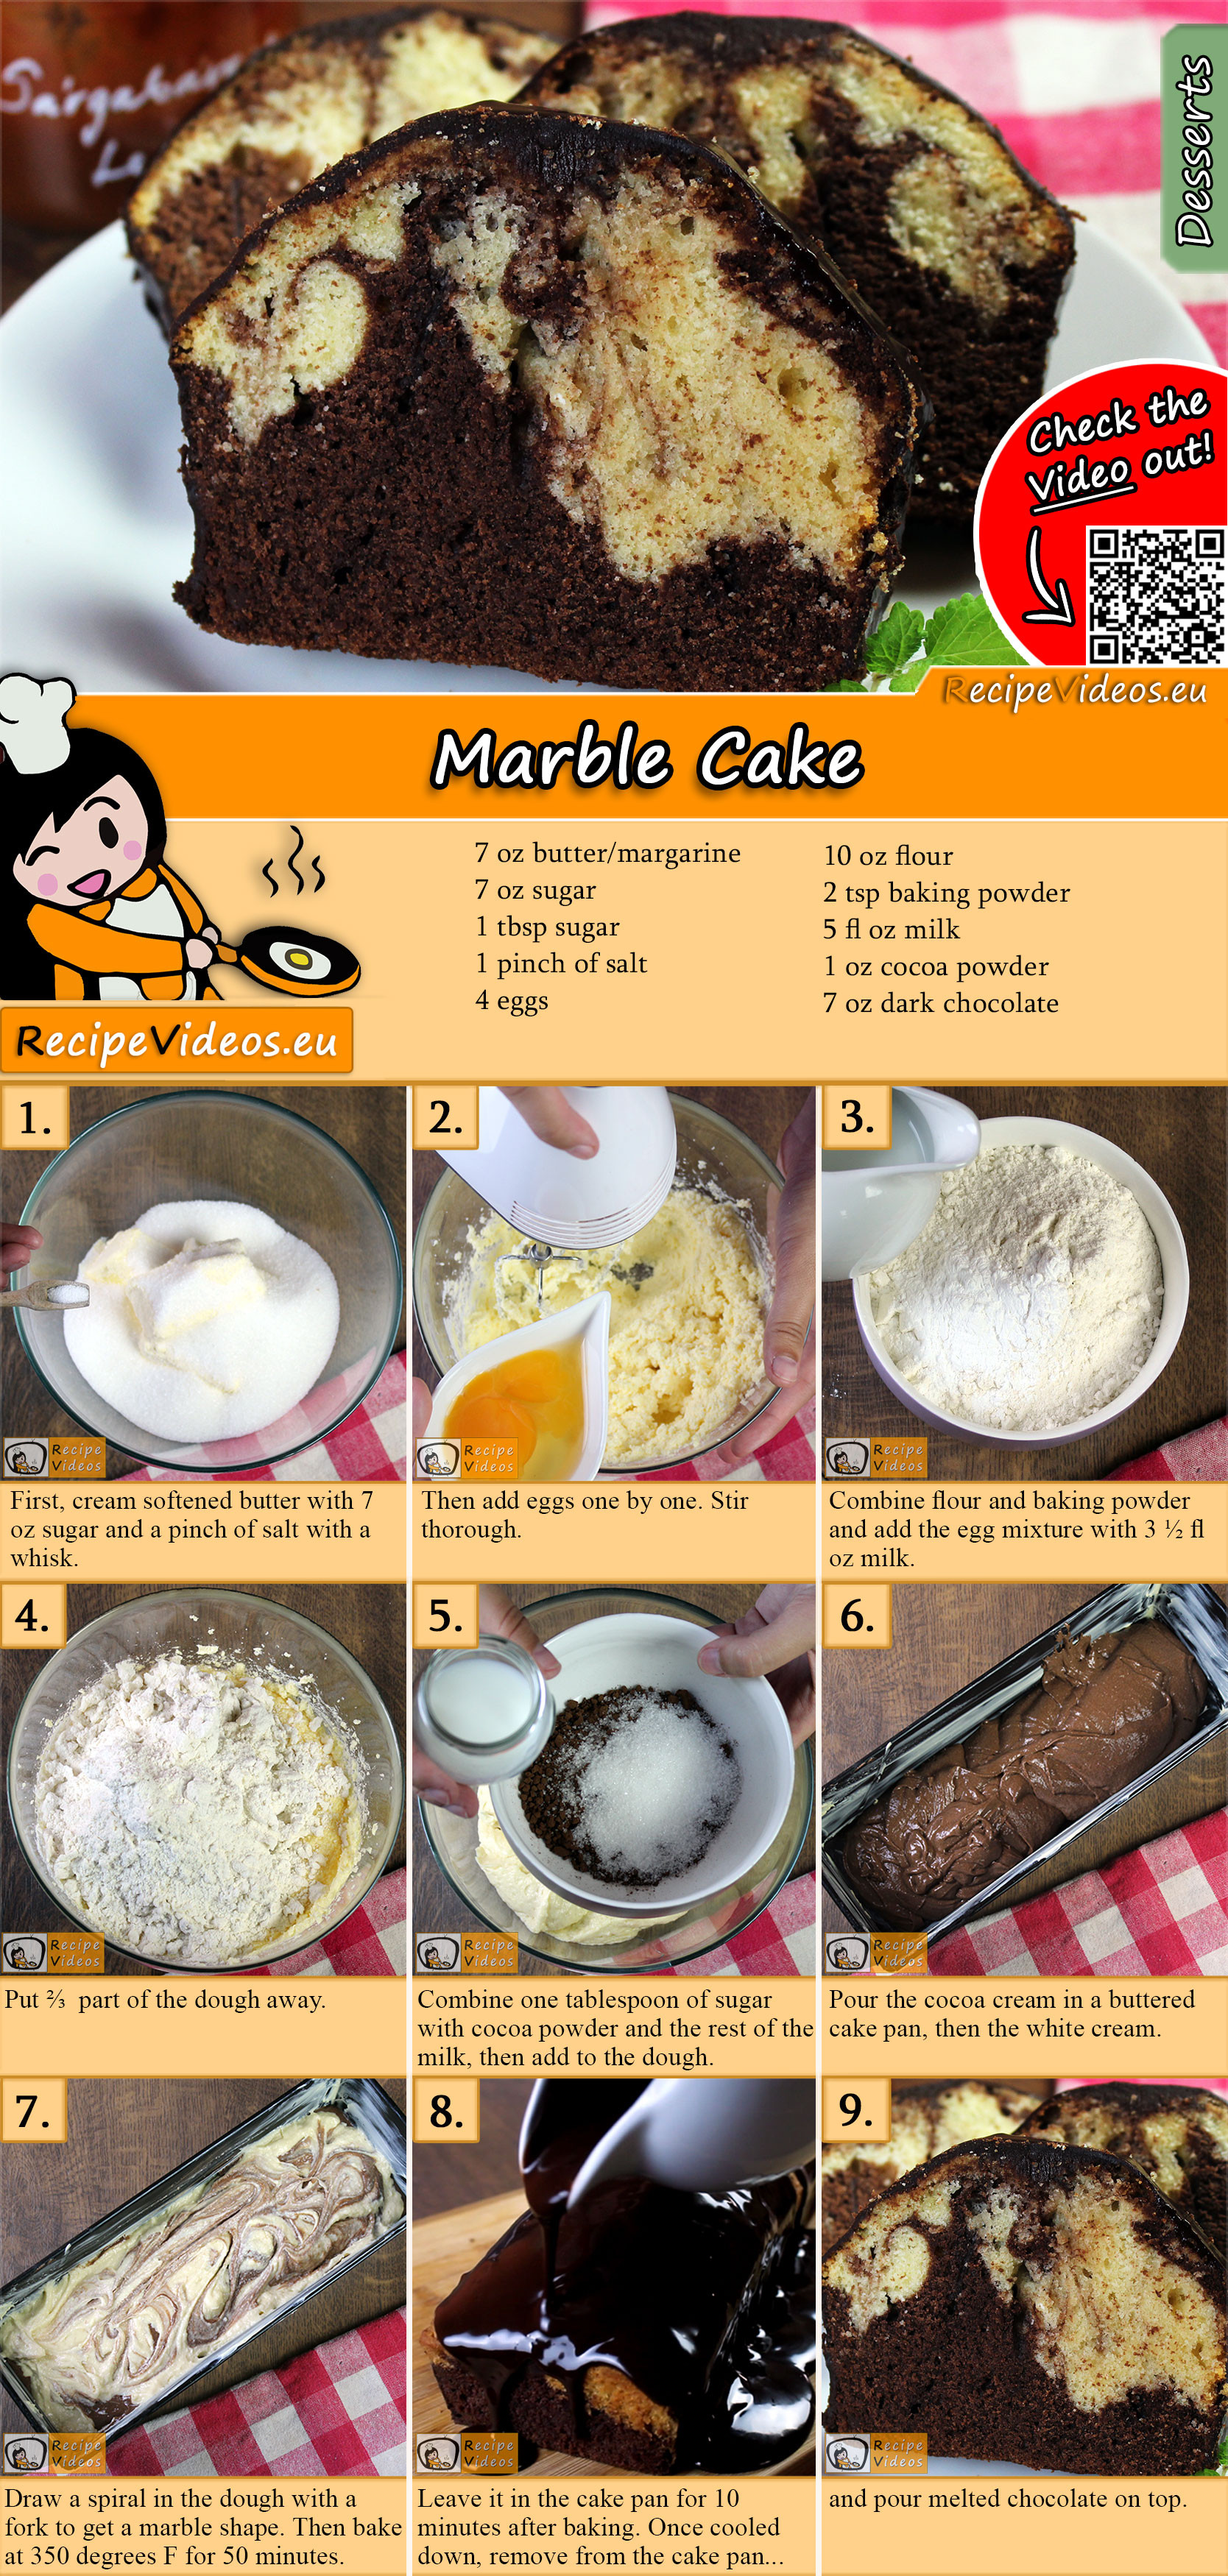 Marble Cake recipe with video